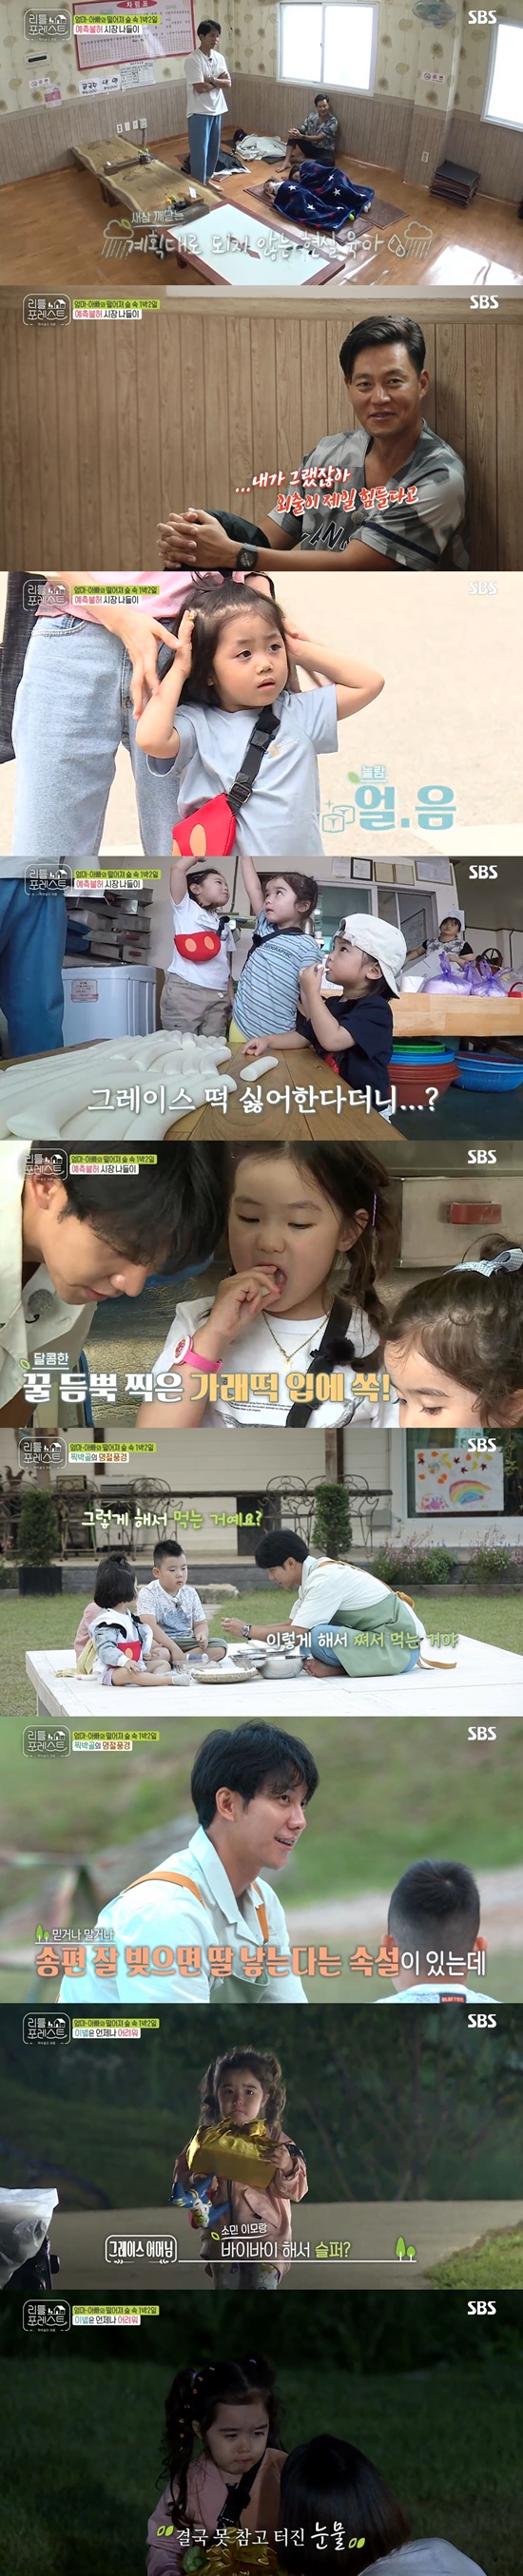 Little Forest soared to 6.1 percent of the highest audience rating per minute.On the 17th, SBS Little Forest depicted Lee Seo-jin, Lee Seung-gi, Park Na-rae and Jung So-min, who were in the market for Chuseok with Little.The carers and the Littles headed to the market to buy the ingredients for the holiday food, and the Littles were excited about the first market outing with The Uncle and Auntie.But the excitement was also a moment, and Lee Seung-gi and Lee Seo-jin lamented that if you have children, there is nothing that you think is going to happen.Lee Seung-gi and Lee Seo-jin sighed when they lay the Littles in Restaurant.In the meantime, Park Na-rae and Jung So-min had a good time watching the process of popping with Lee Han and Ye Jun.Waking up, Eugene, Grace and Gaon headed for the market mill with Lee Seung-gi, who were happy to eat freshly-made rice cakes in honey.Since then, I have bought hot dogs in the market and enjoyed a pleasant outing with lunch together.After returning home after finishing the shopping, they started making Chuseok food such as Songpyeon and the war.Following a demonstration by Songpyeons master Lee Seung-gi The Uncle, Little also participated in the Songpyeon debt by sitting on a pong.The family-like appearance of preparing Chuseok food together made me smile.In particular, Lee Seung-gi said, Is not there a myth that you will have a daughter if you make a songpyeon well?Little Lee enjoyed a generous dinner with the finished Songpyeon and Chuseok food.Later, the breakup time came for Littles to take their familys hands and return. Grace stopped and started crying.To her mother, Grace cried, I miss Aunt Somin. The scene soared to 6.1 percent per minute, taking the best minute.Little Forest is broadcast every Monday and Tuesday at 10 pm.Photo = SBS Broadcasting Screen